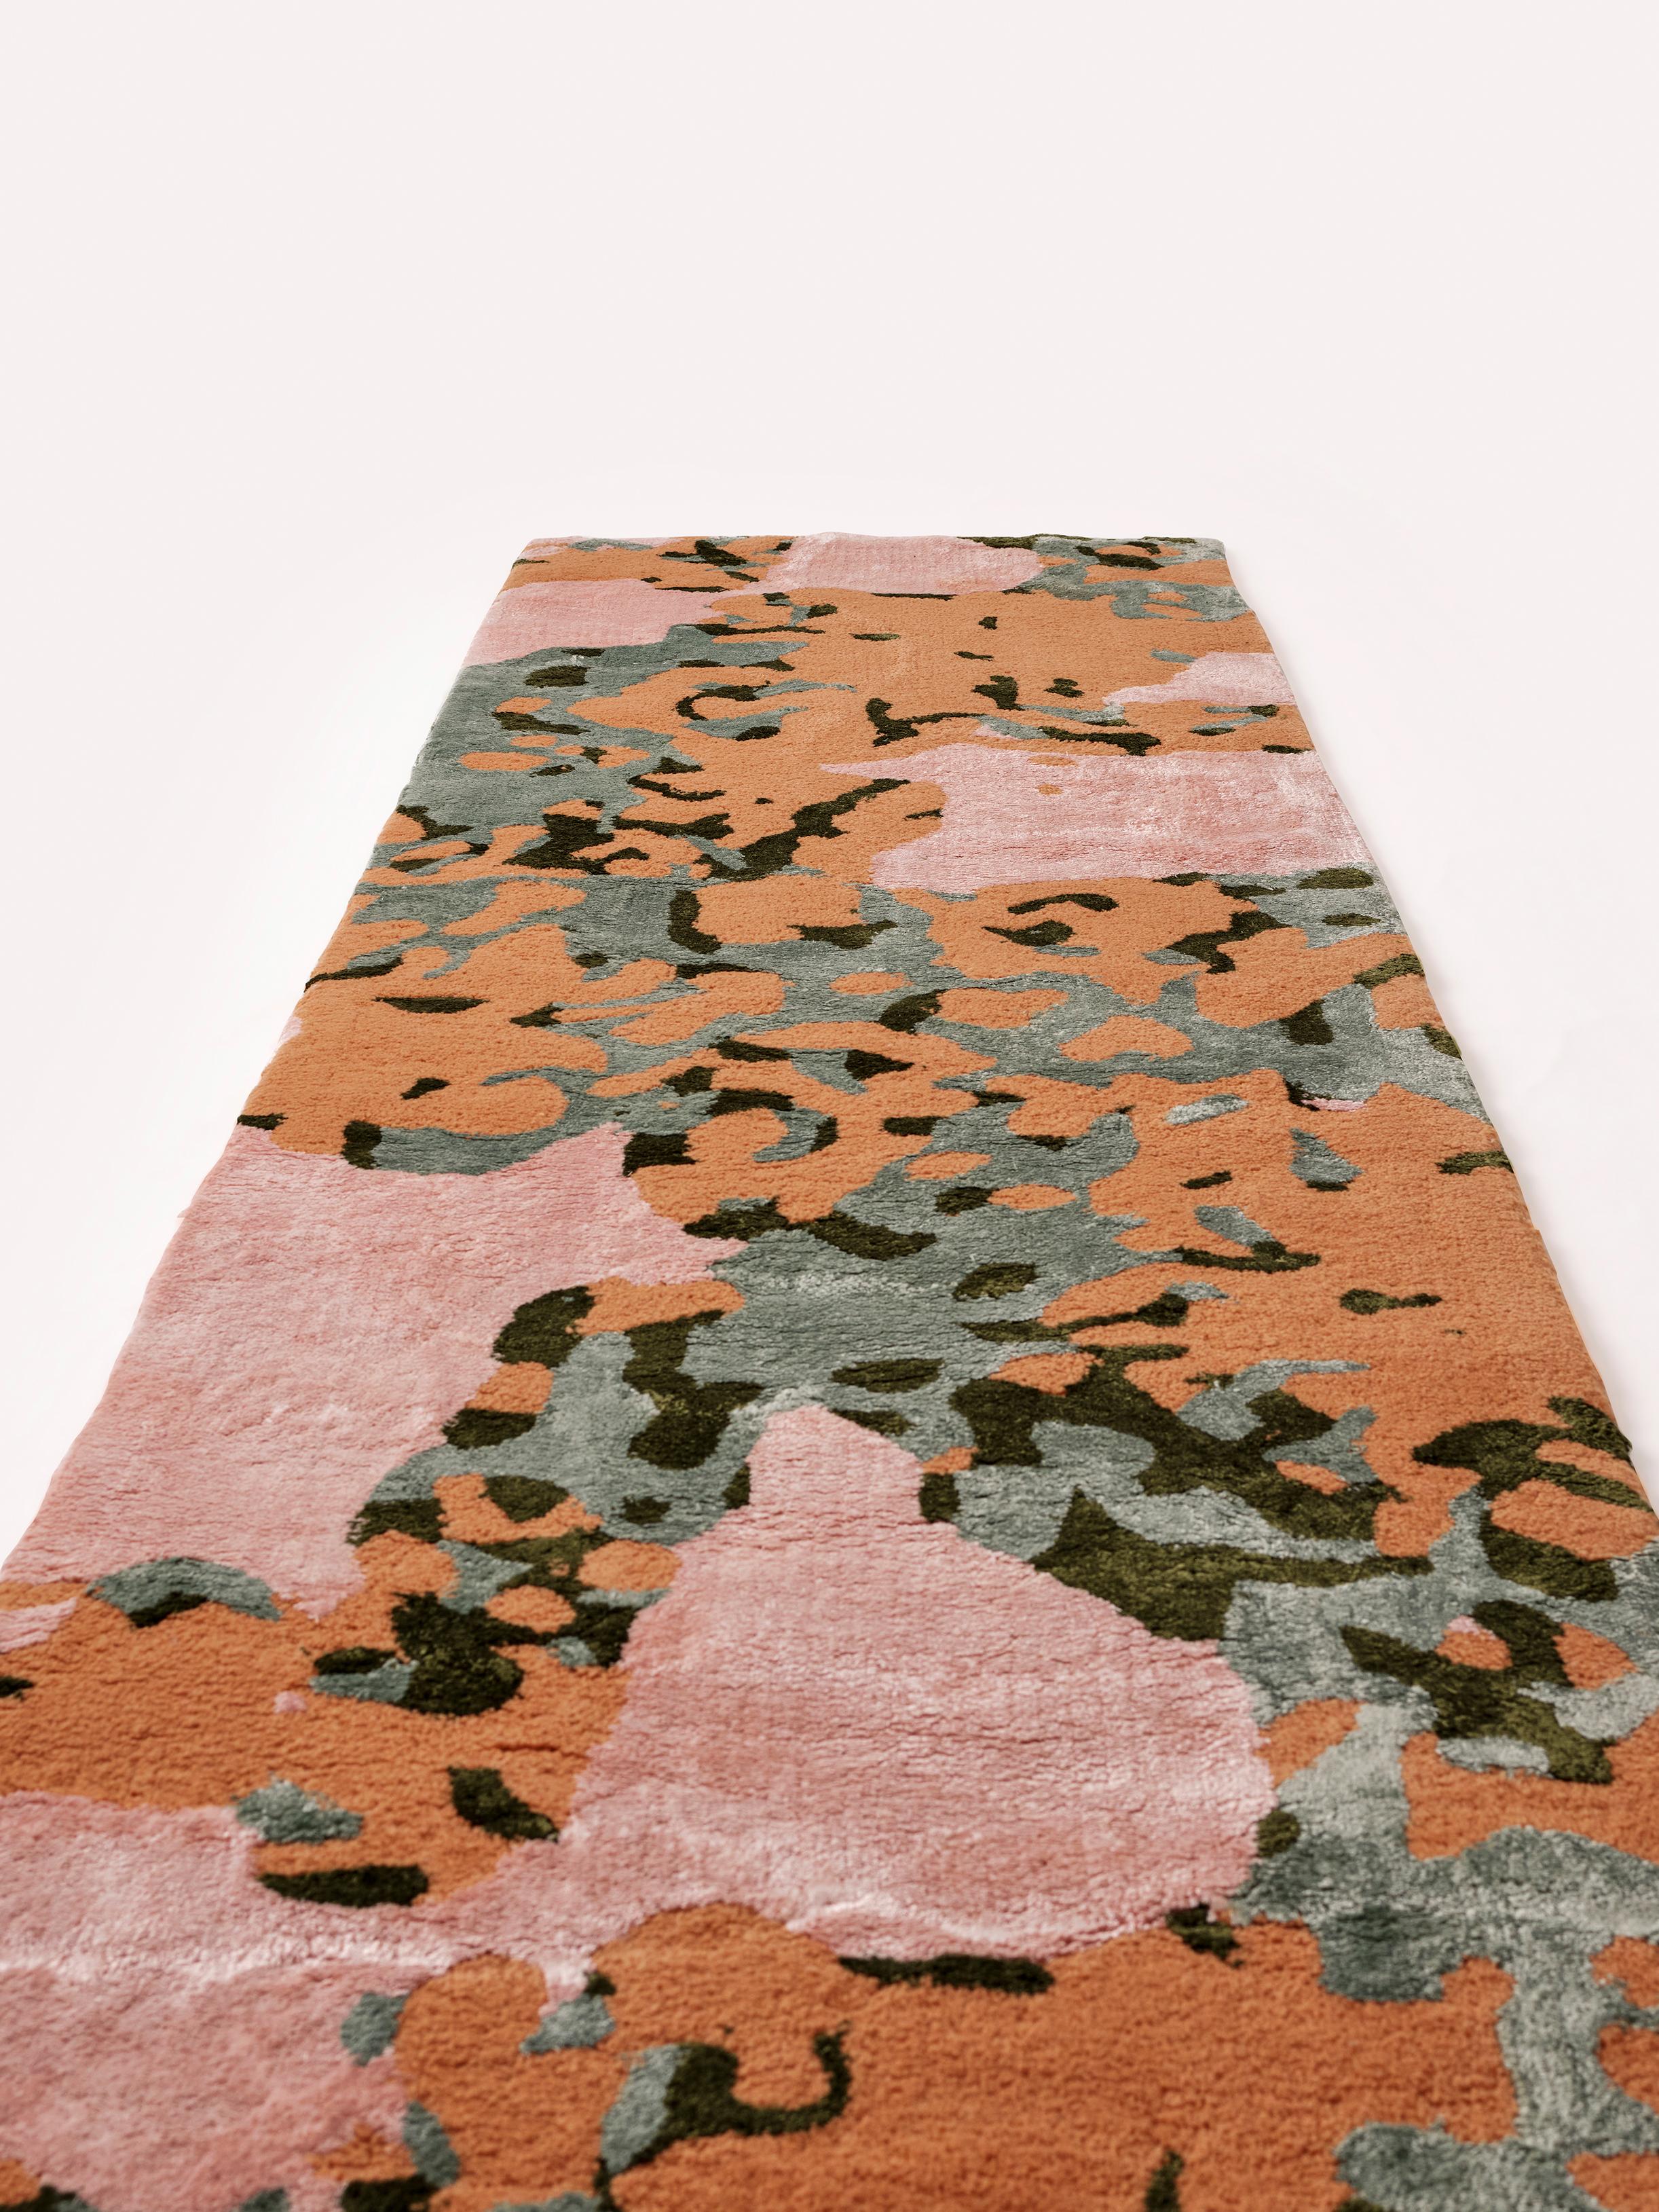 BLAB Rug is an end result of a zoomed in drawing made on i-pad . By experimenting with different digital brushes, this runner/rug is created by blending pink, blue, green and brown colors. Blab is made of wool & viscose and can be produced in custom